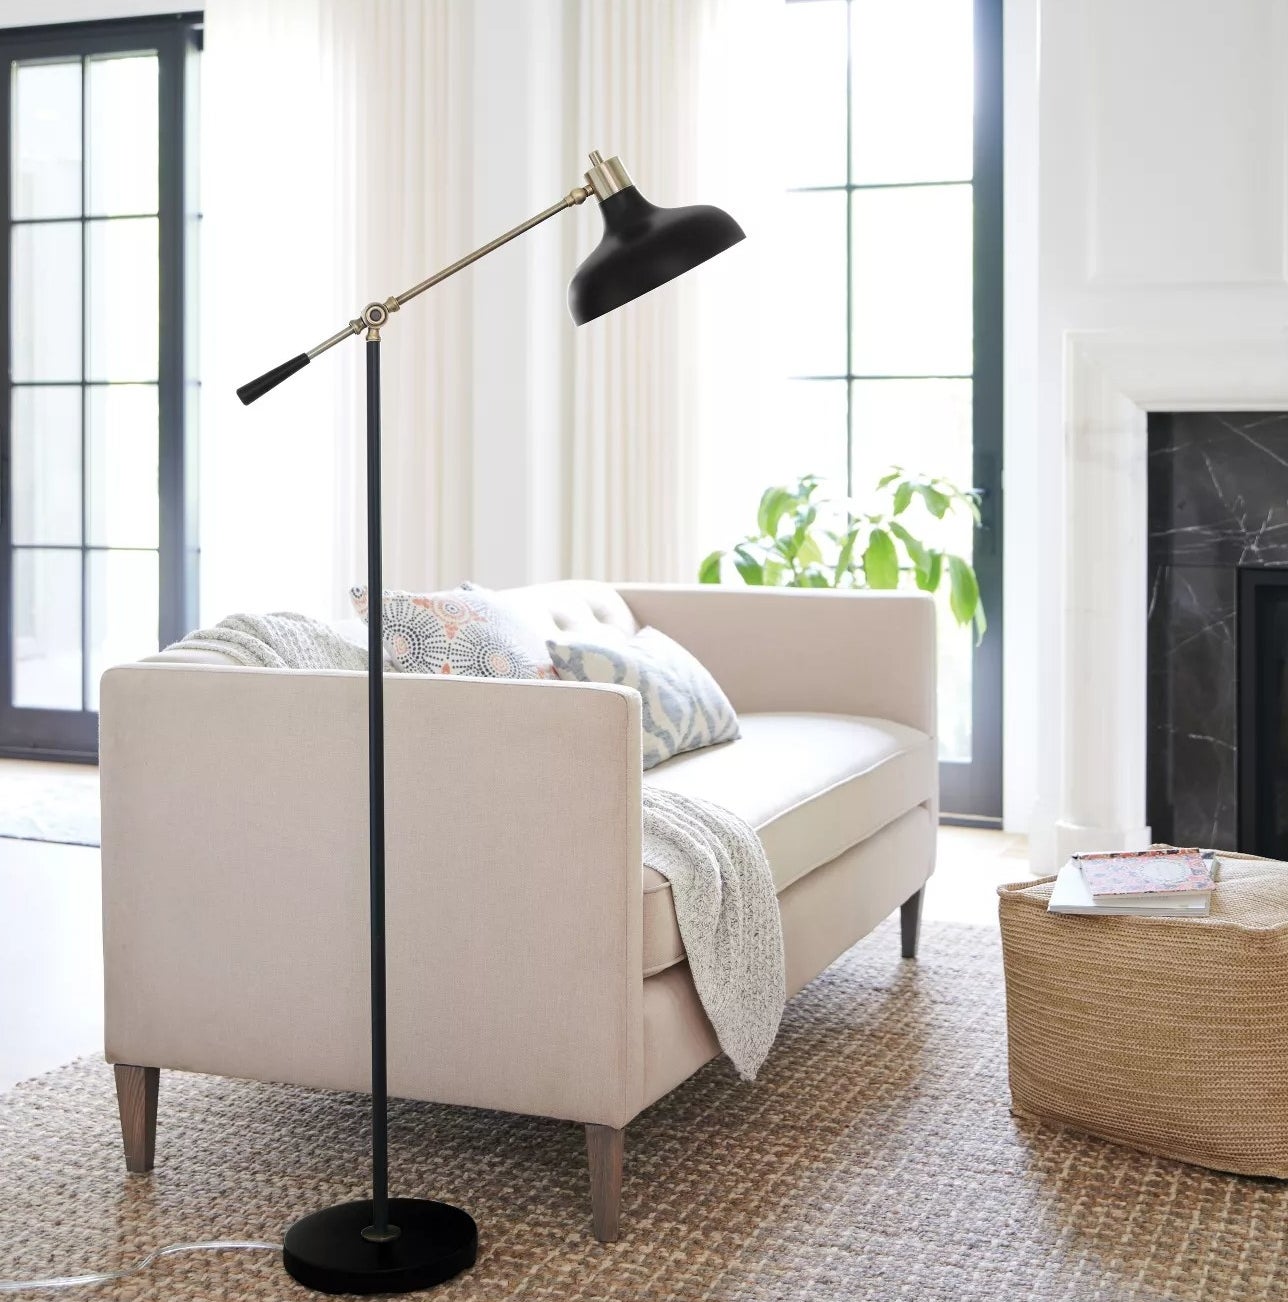 The lamp with an adjustable arm and circular base in a living room